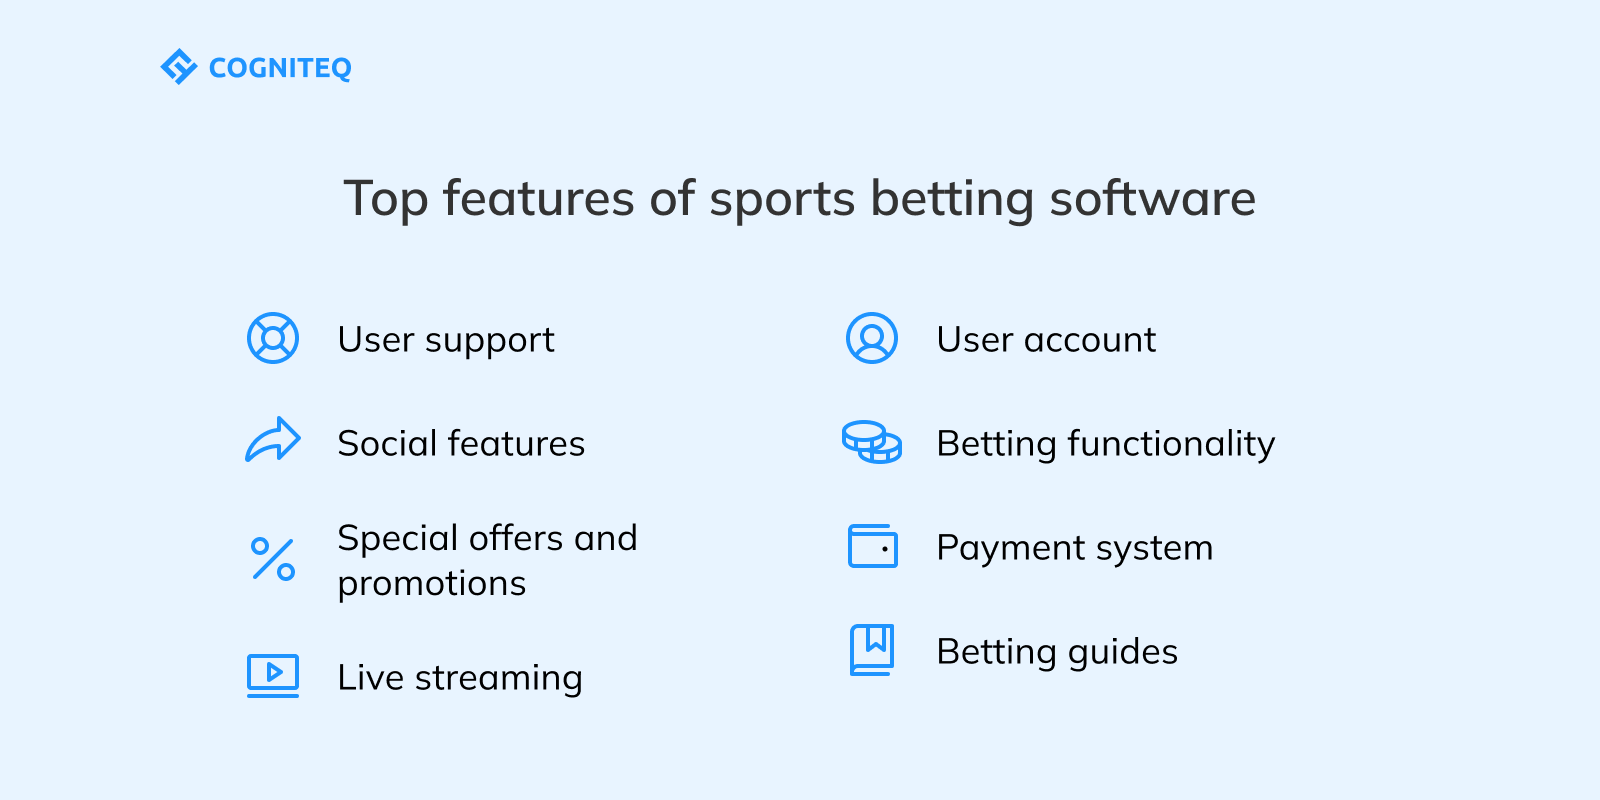 Top features of sports betting software